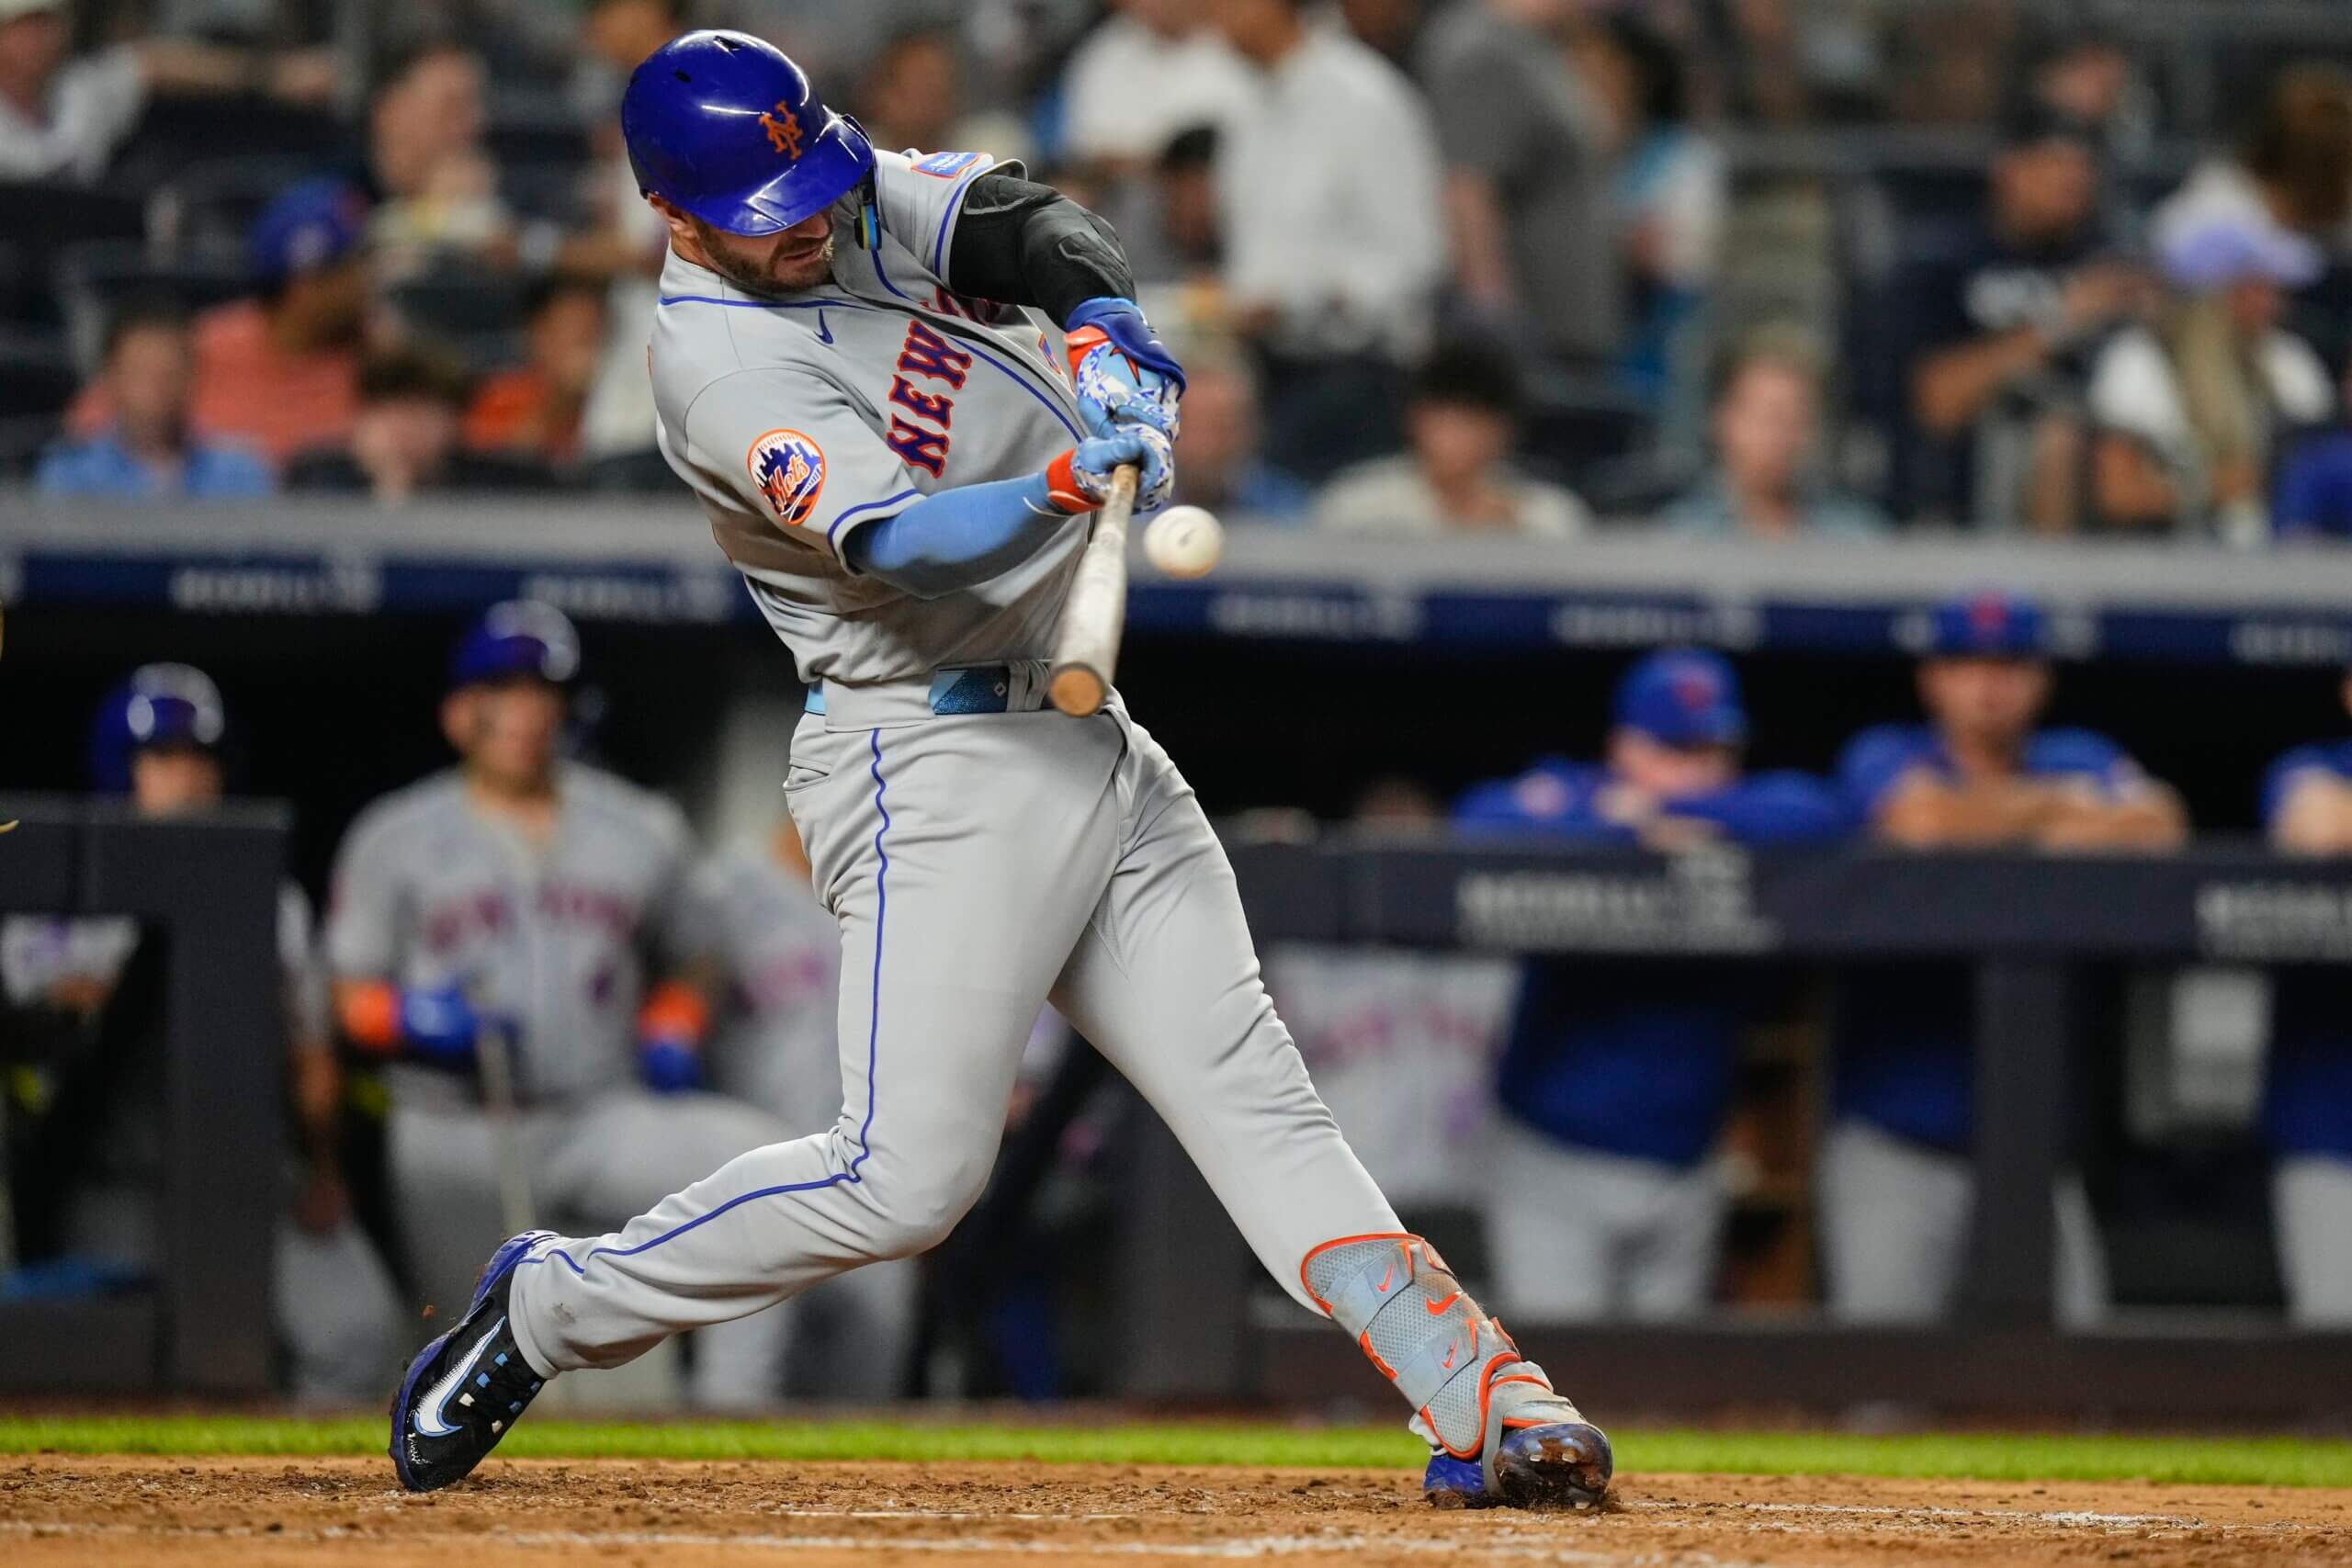 Pete Alonso homers twice, drives in 5 as Mets pound Yankees 9-3